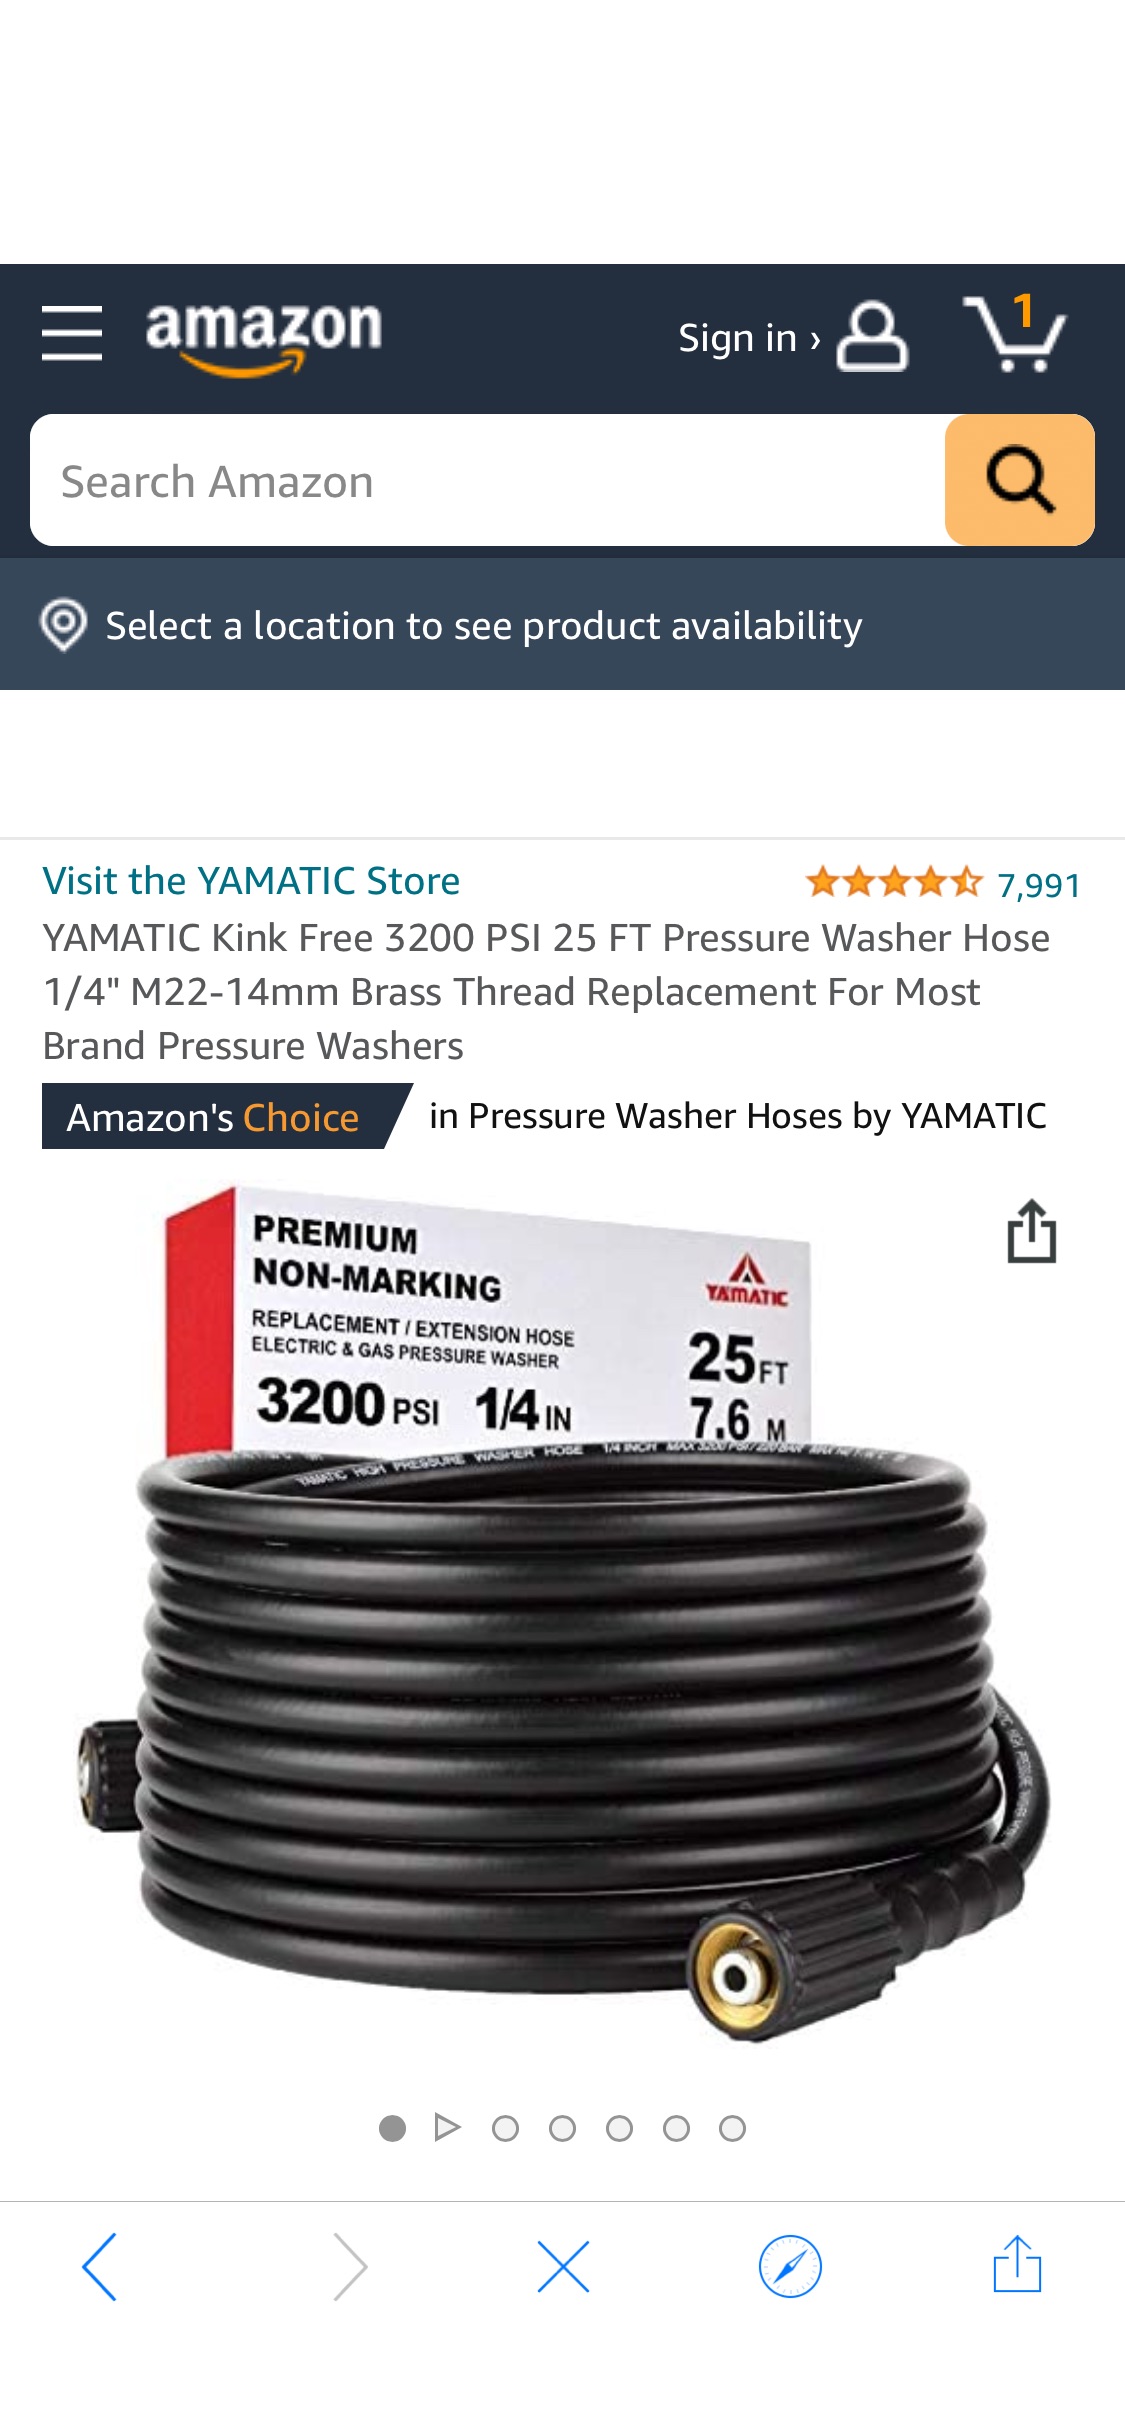 Amazon.com: YAMATIC Kink Free 3200 PSI 25 FT Pressure Washer Hose 1/4" M22-14mm Brass Thread Replacement For Most Brand Pressure Washers : Patio, Lawn & Garden